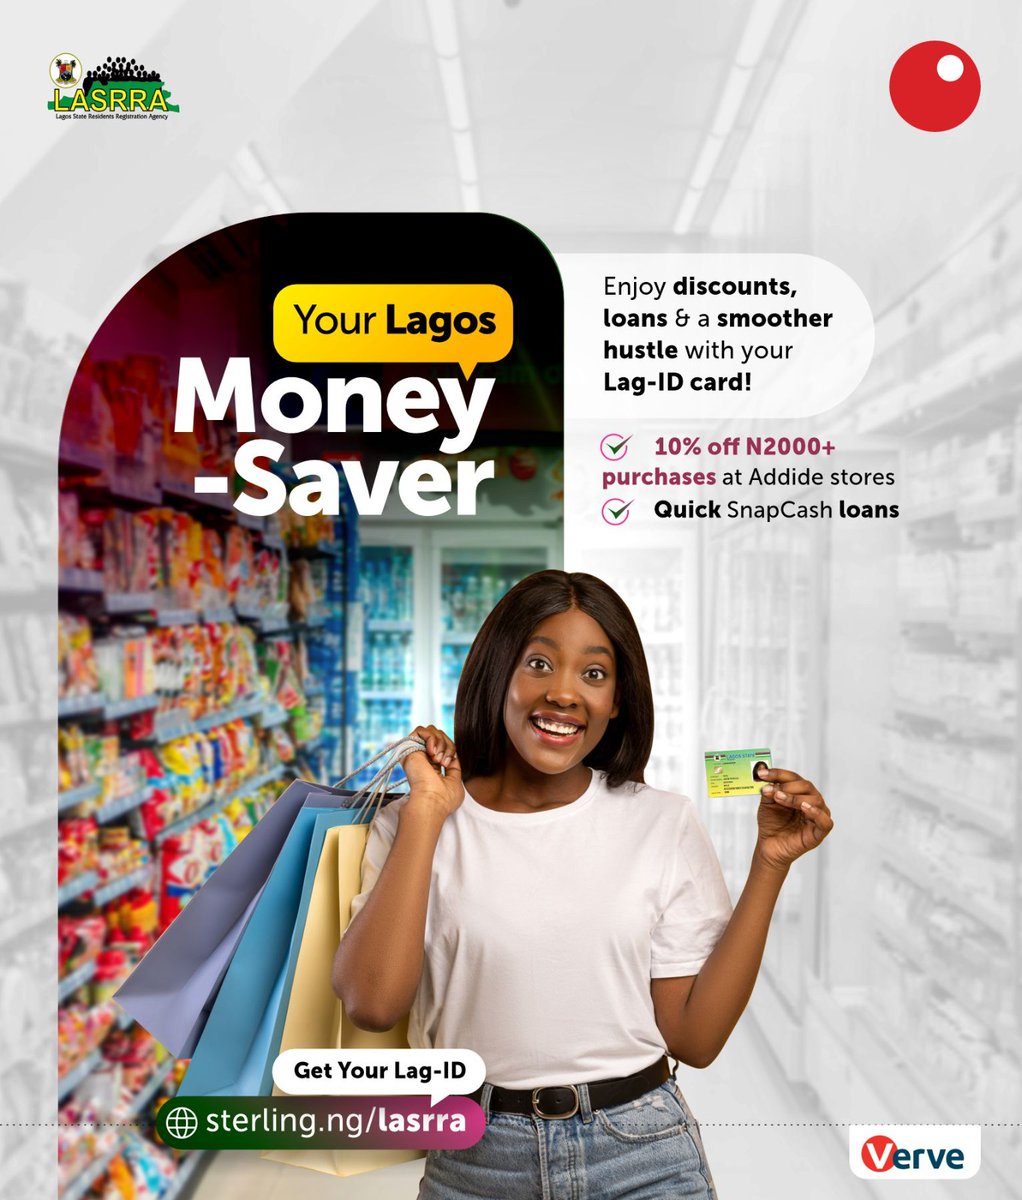 Unlock sweet deals and loans with a Lag-ID card. Apply at Sterling.ng/lasrra #Sterling #LagID #Lasrra